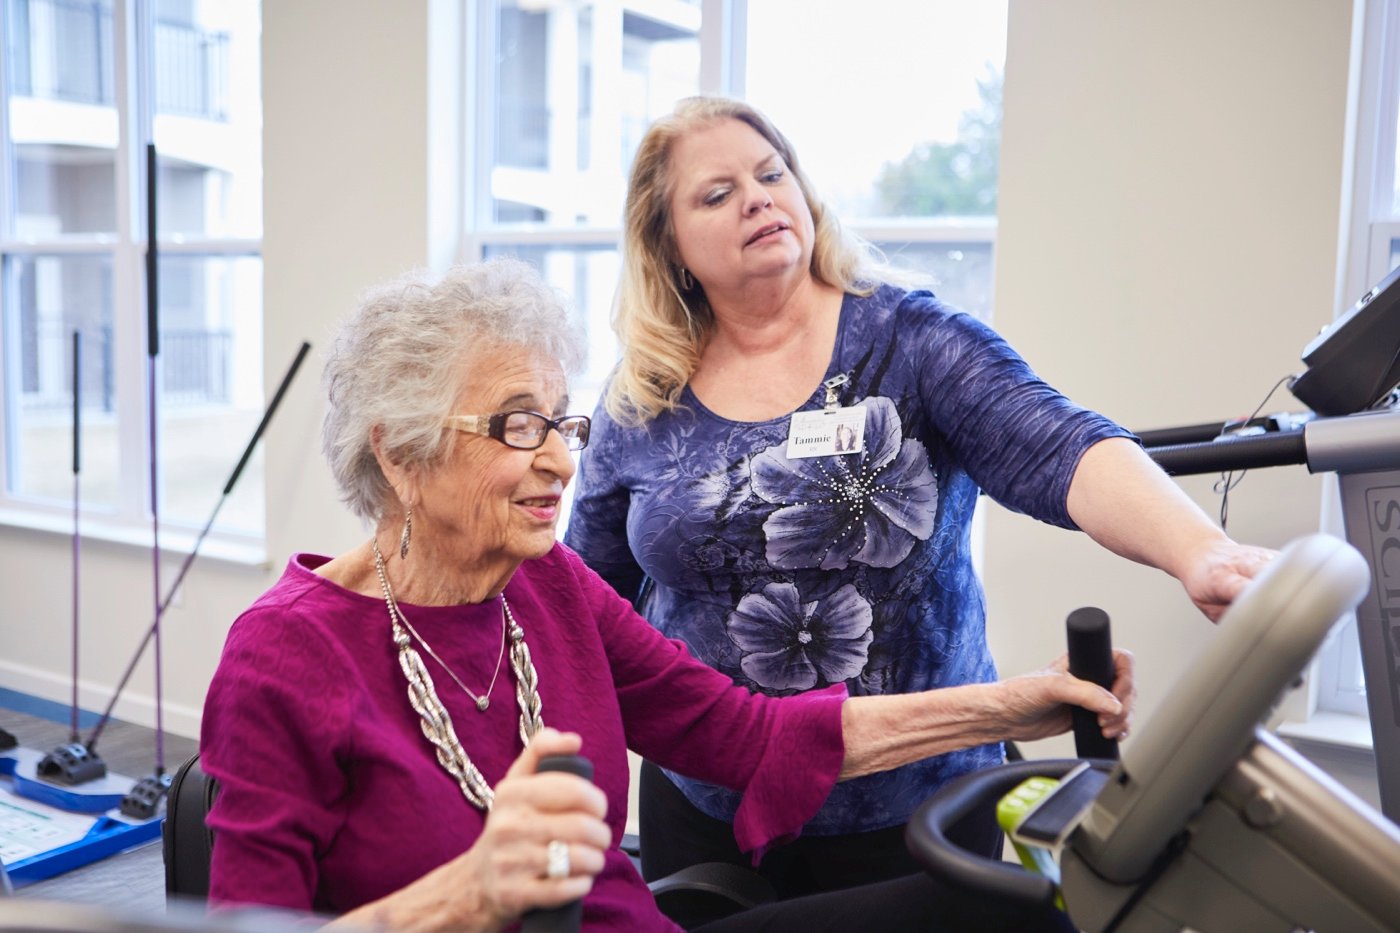 senior woman riding exercise bike with staff supervising